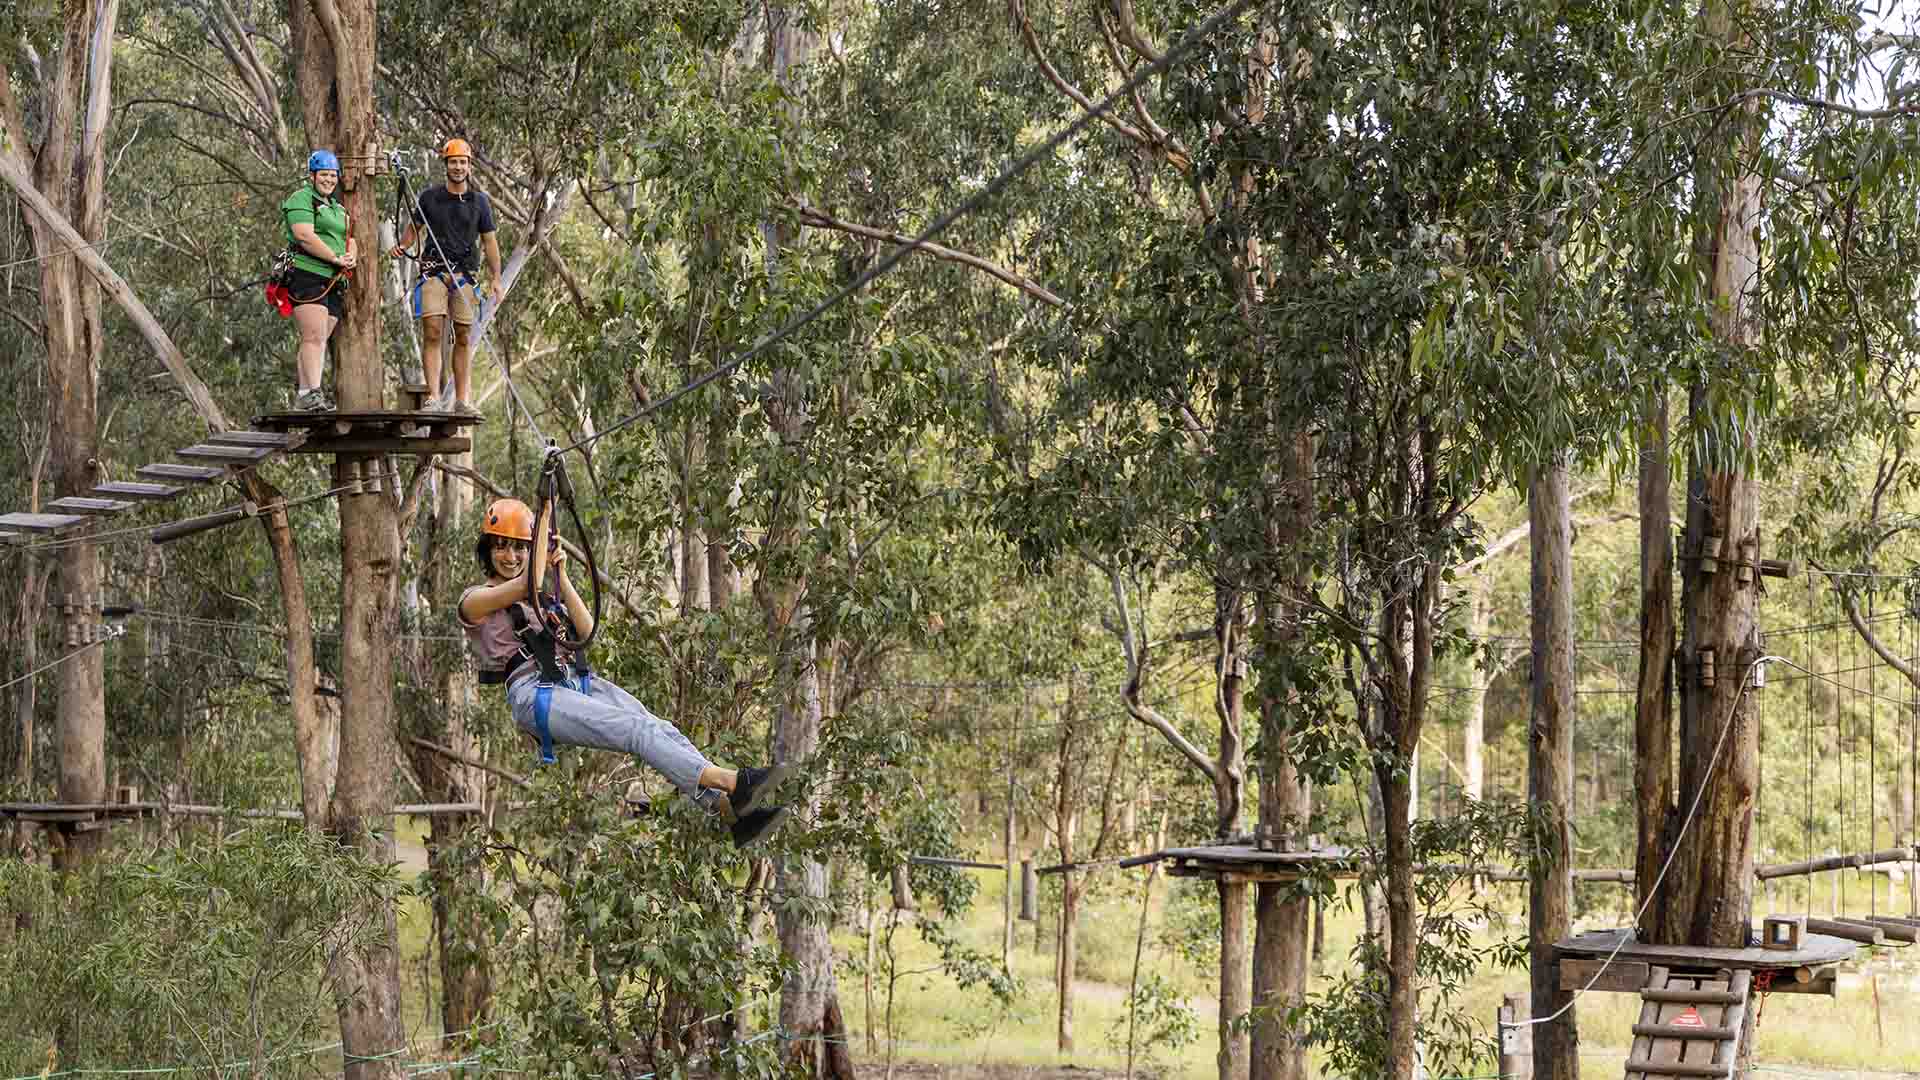 Six Epic Outdoor Adventures You Should Add to Your Greater Western Sydney Hit List